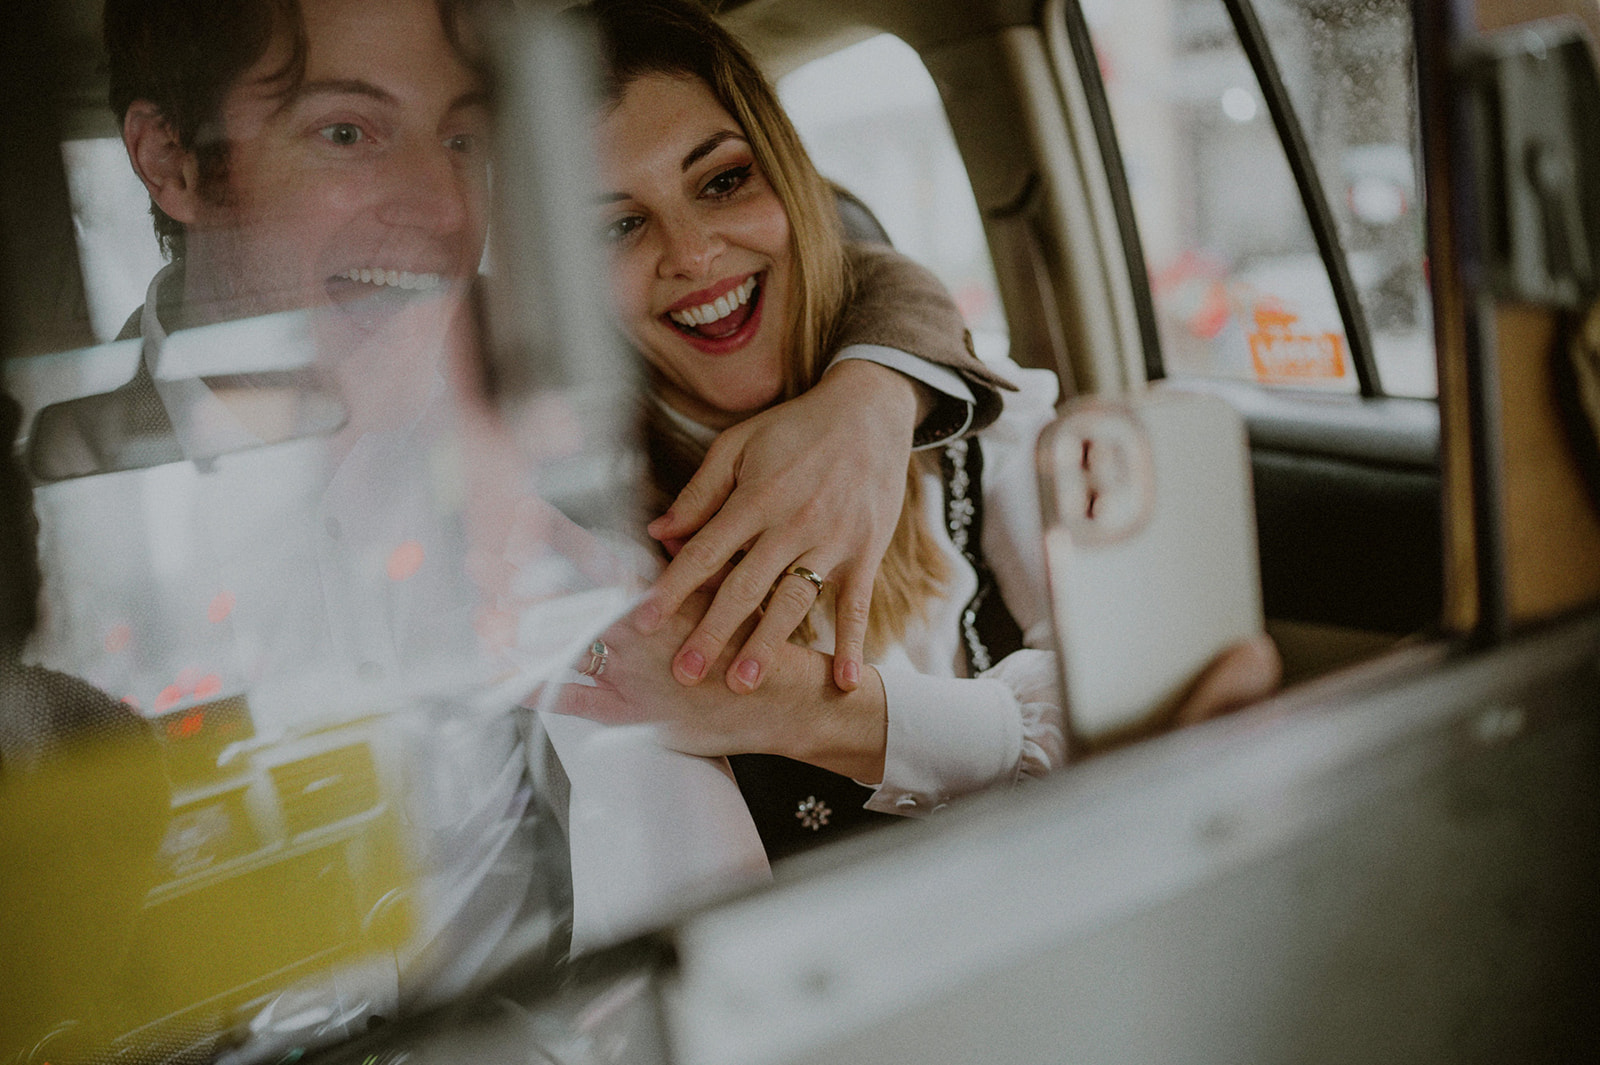 just married couple showing off their wedding ring on a phone call in the back of a nyc taxi cab